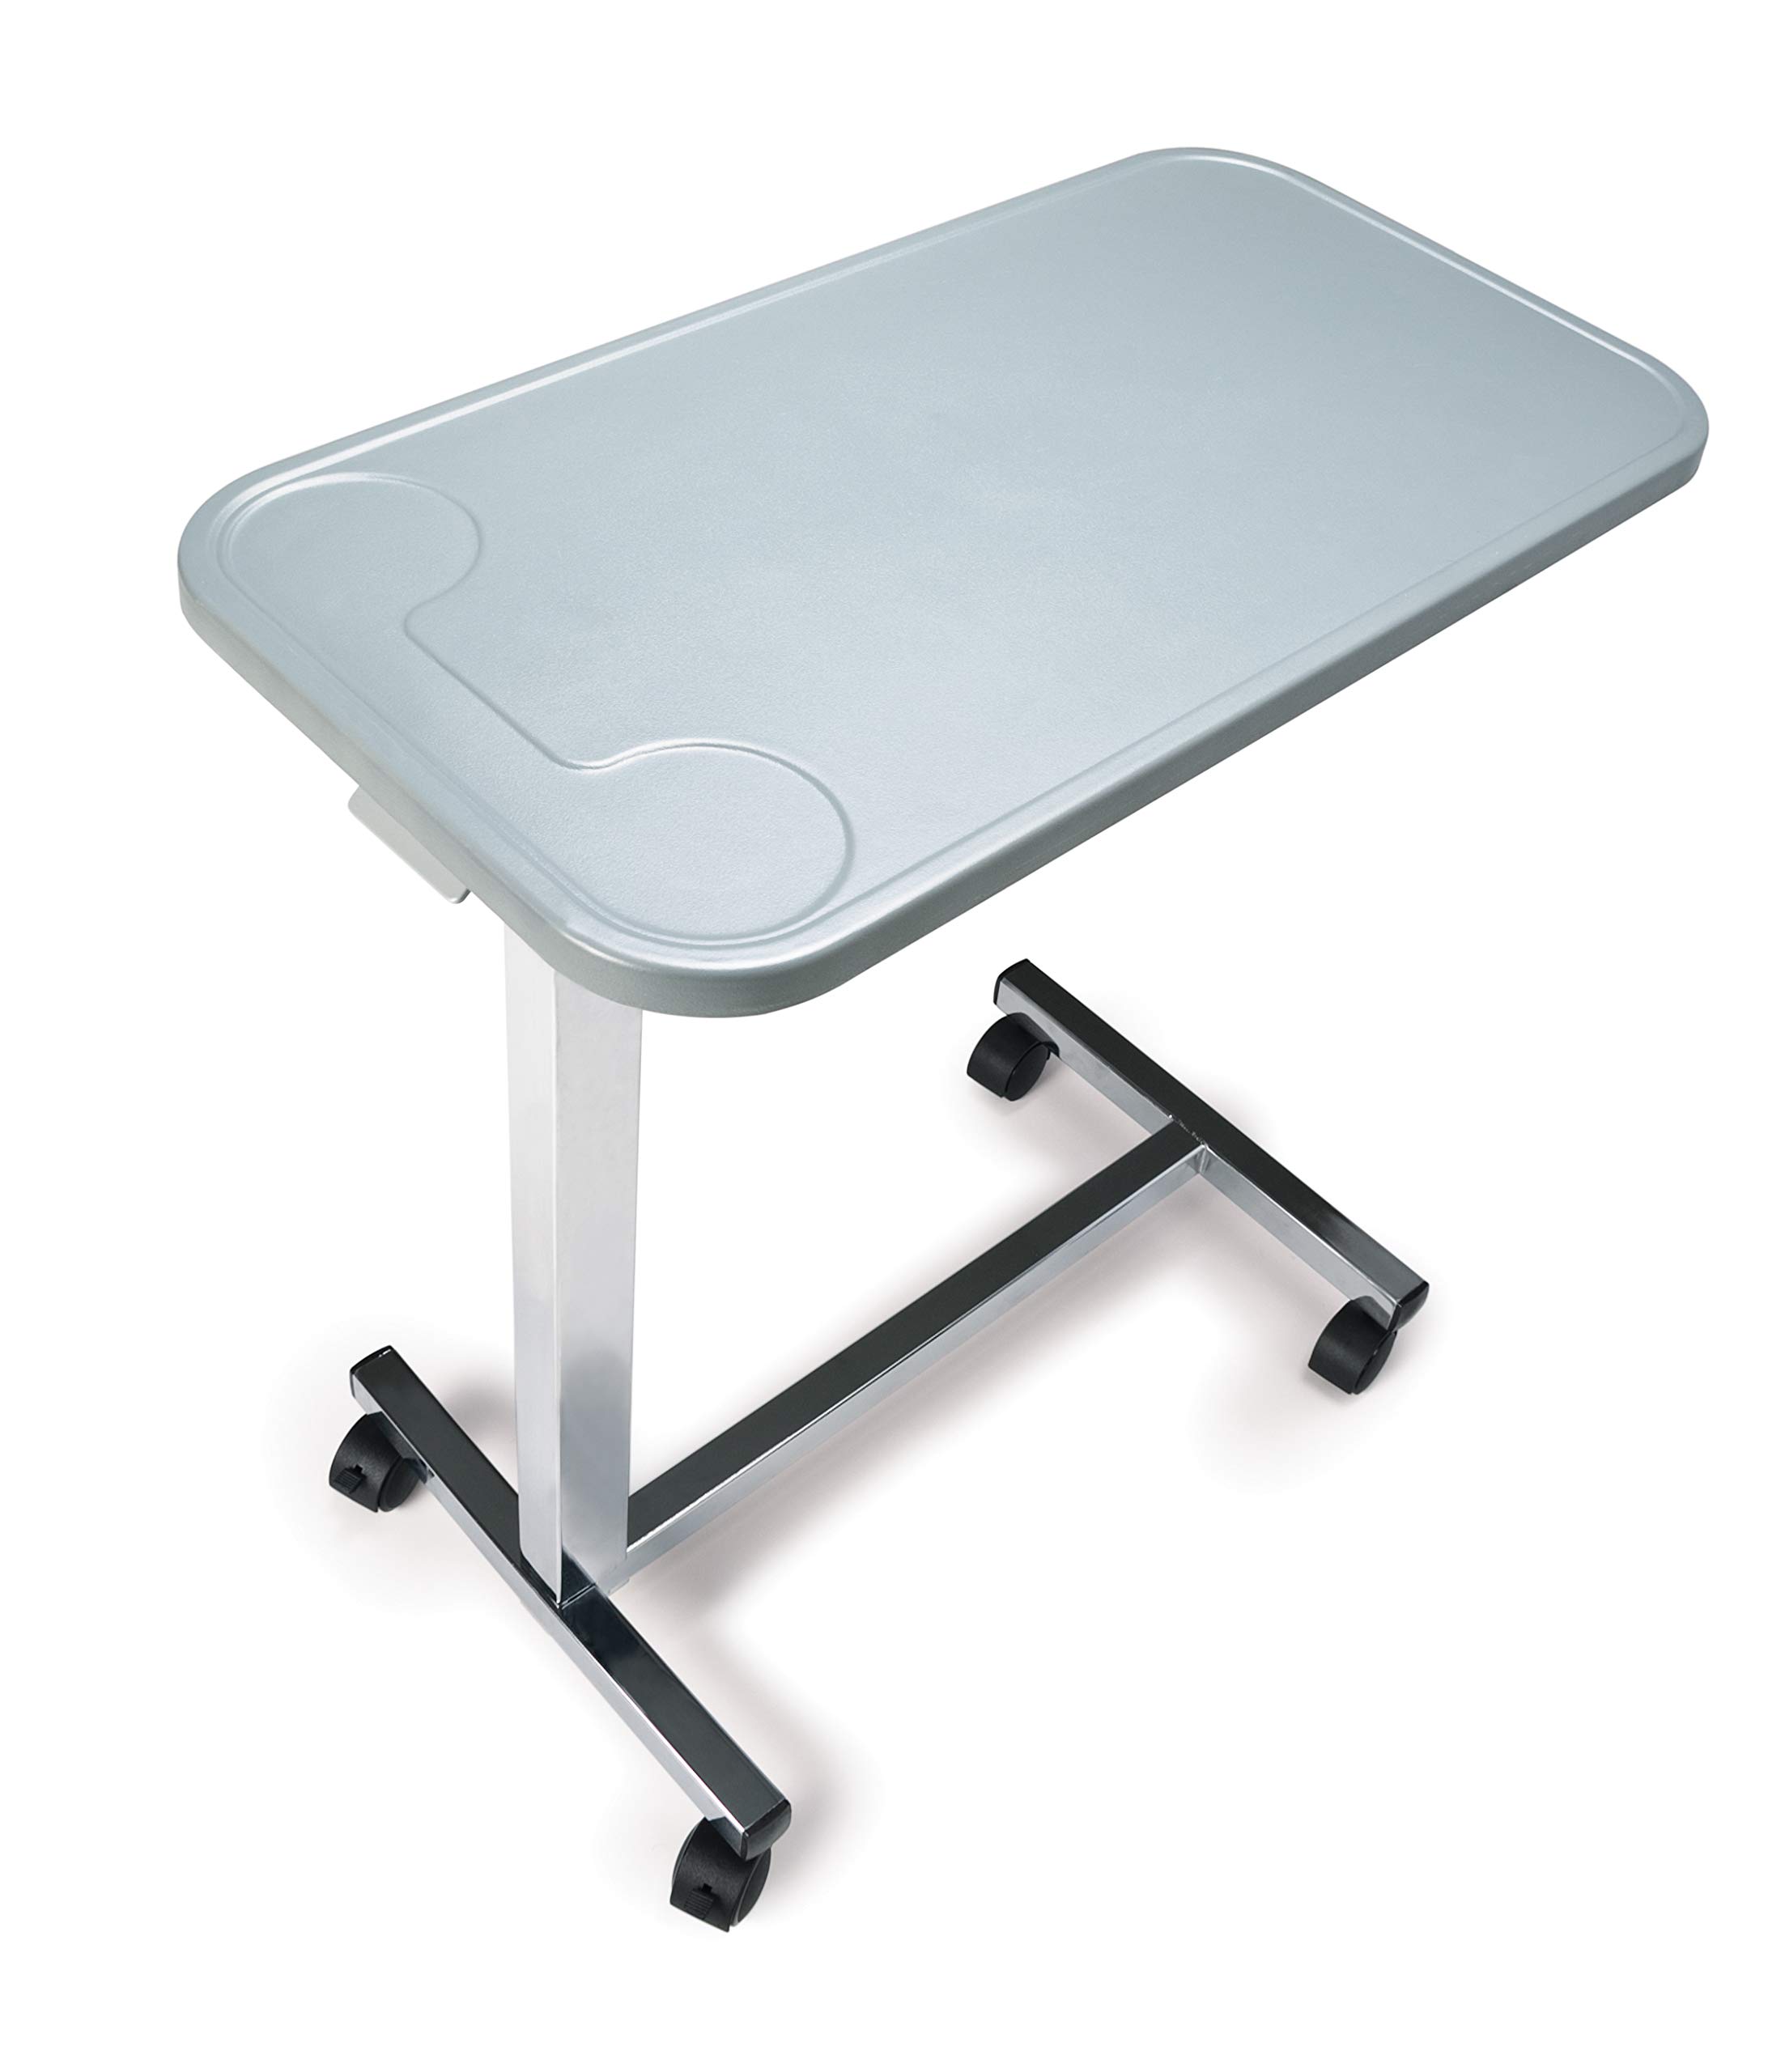 Graham-Field GF8903P Lumex Modern Overbed Table with Wheels, 28-41